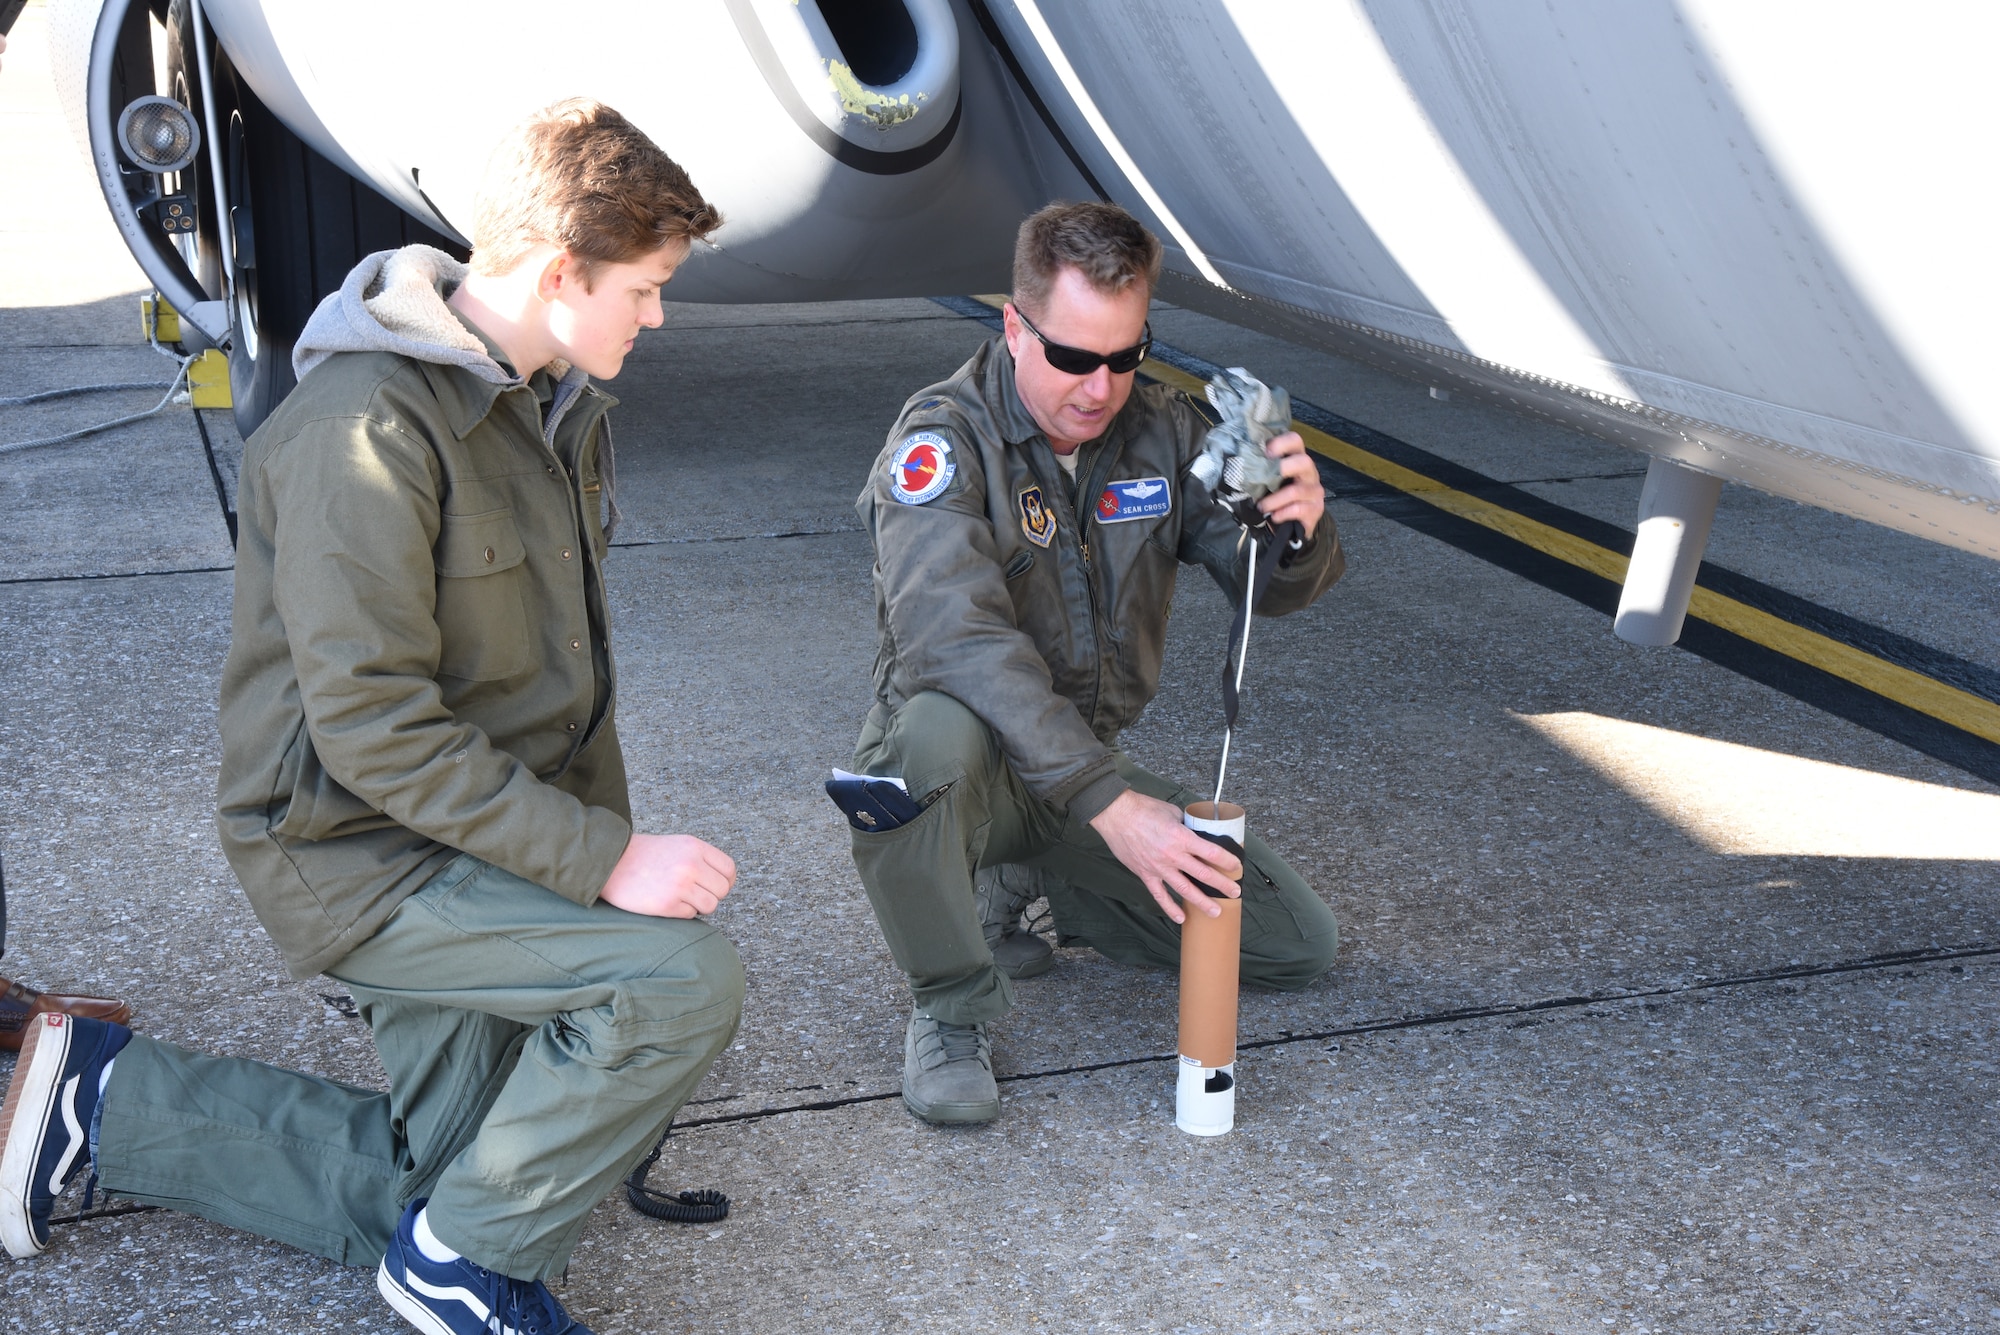 Lt. Col. Sean Cross, 53rd Weather Reconnaissance Squadron deputy director of operations, demonstrates how a dropsonde works to honorary 2nd Lt. Charles “Payton” Burge, during the Pilot for a Day program Dec. 19, at Keesler Air Force Base, Miss. The 403rd Wing collaborated with Make A Wish Mississippi who selects the children who will participate in the Program. (U.S. Air Force photo by Lt. Col. Marnee A.C. Losurdo)